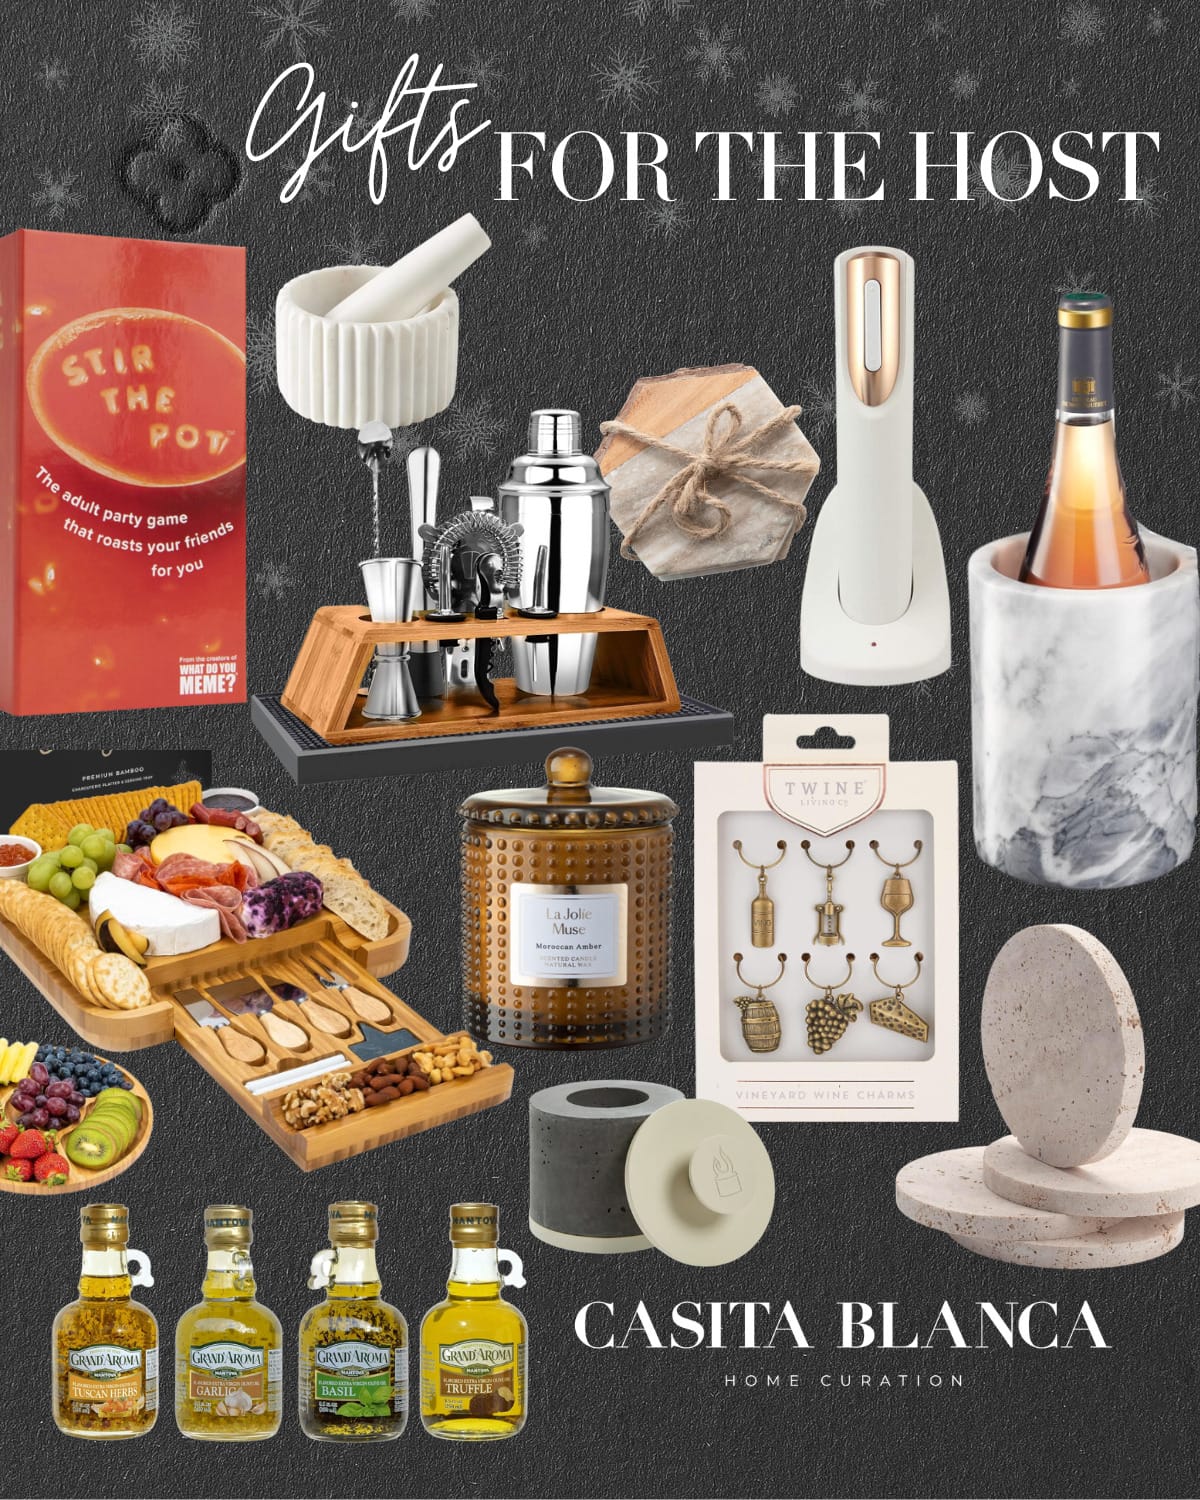 10 holiday gift guides everyone will love | #holiday #giftguide #christmas #giftideas #giftforthehost #giftsforthehostess #holidayhost #holidayparty #bottlechiller #kitchen #oliveoil #partygame